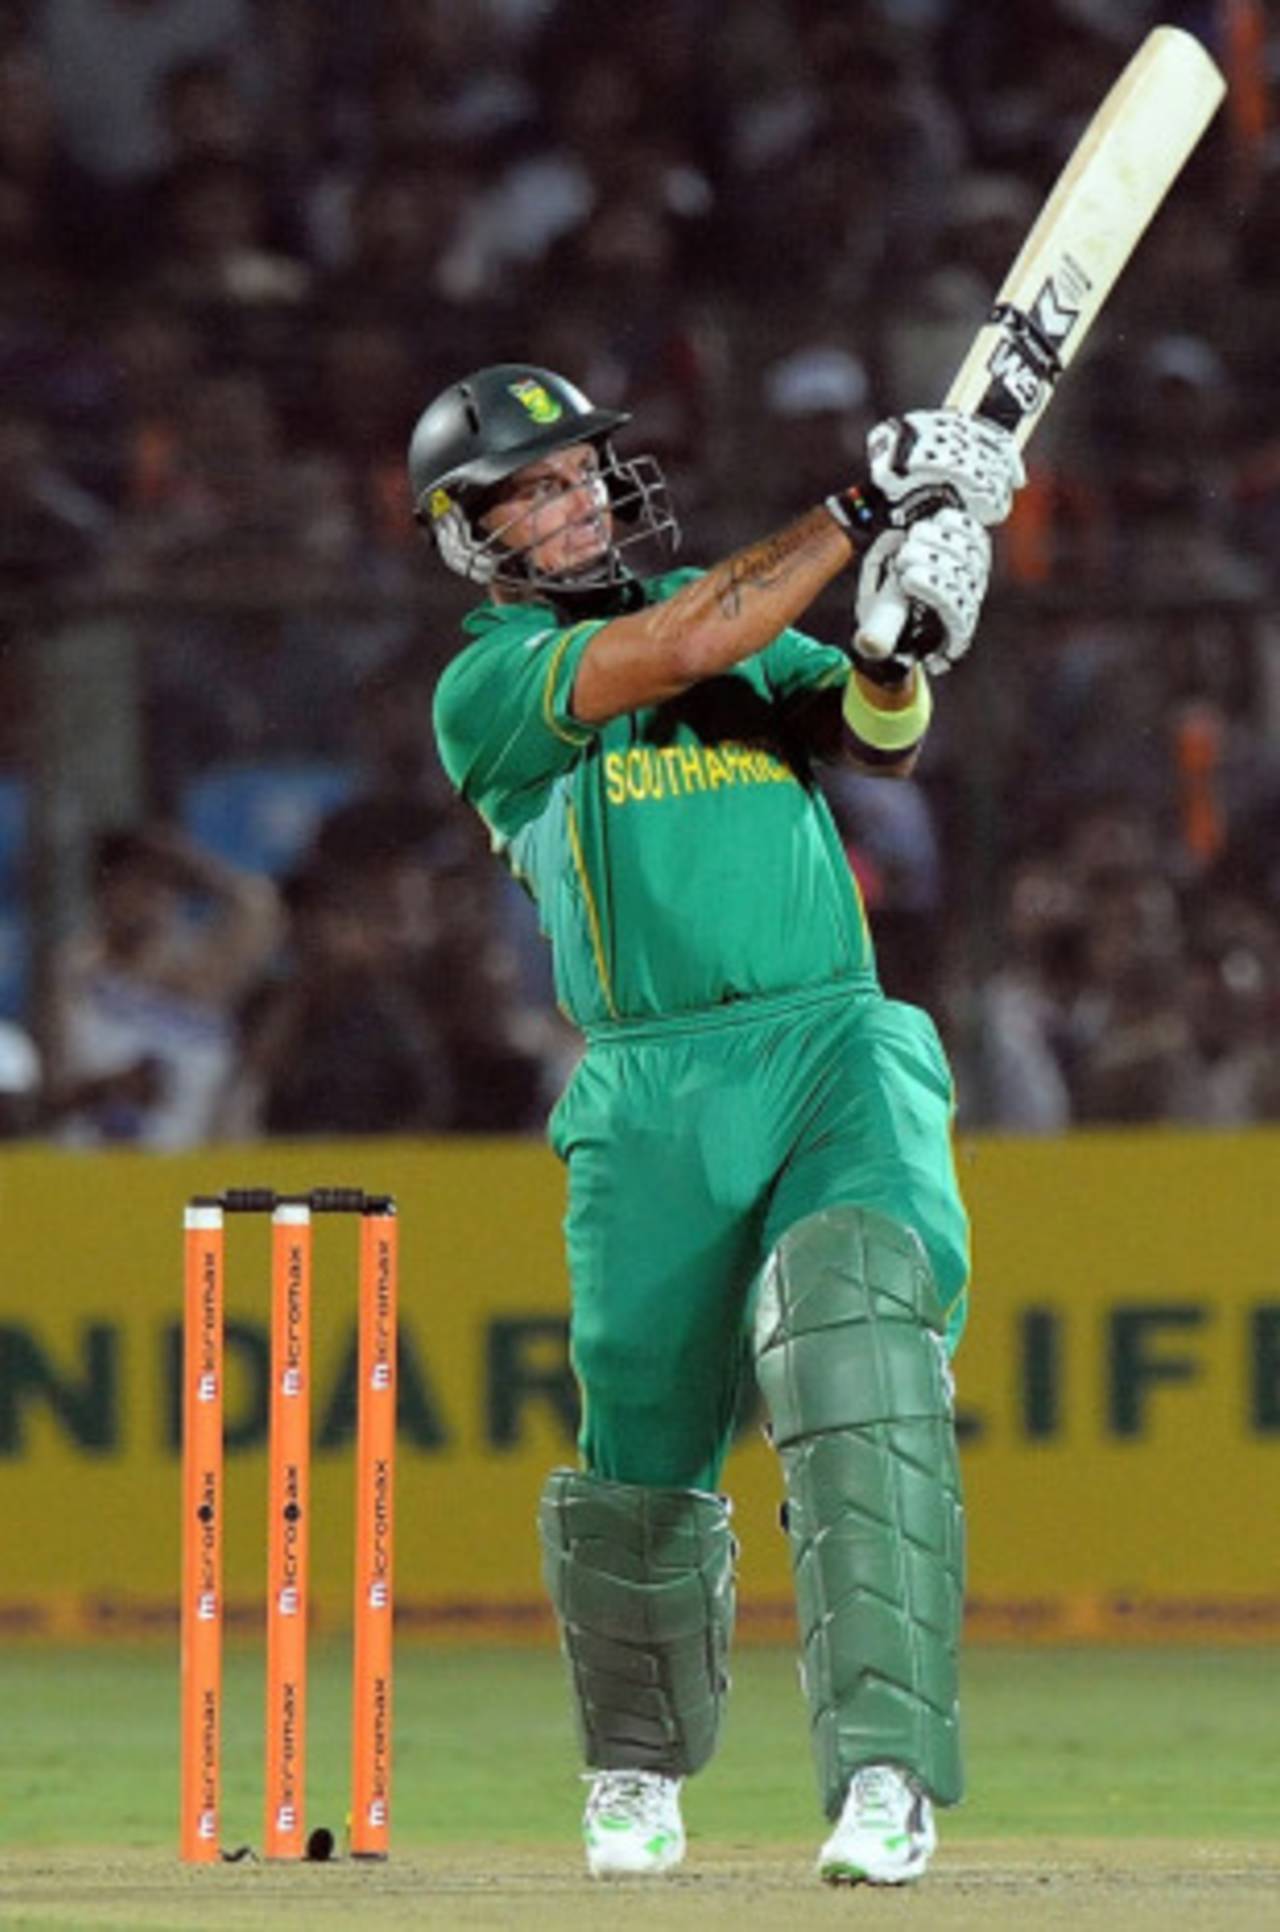 Herschelle Gibbs swings a six over midwicket, India v South Africa, 1st ODI, Jaipur, February 21, 2010